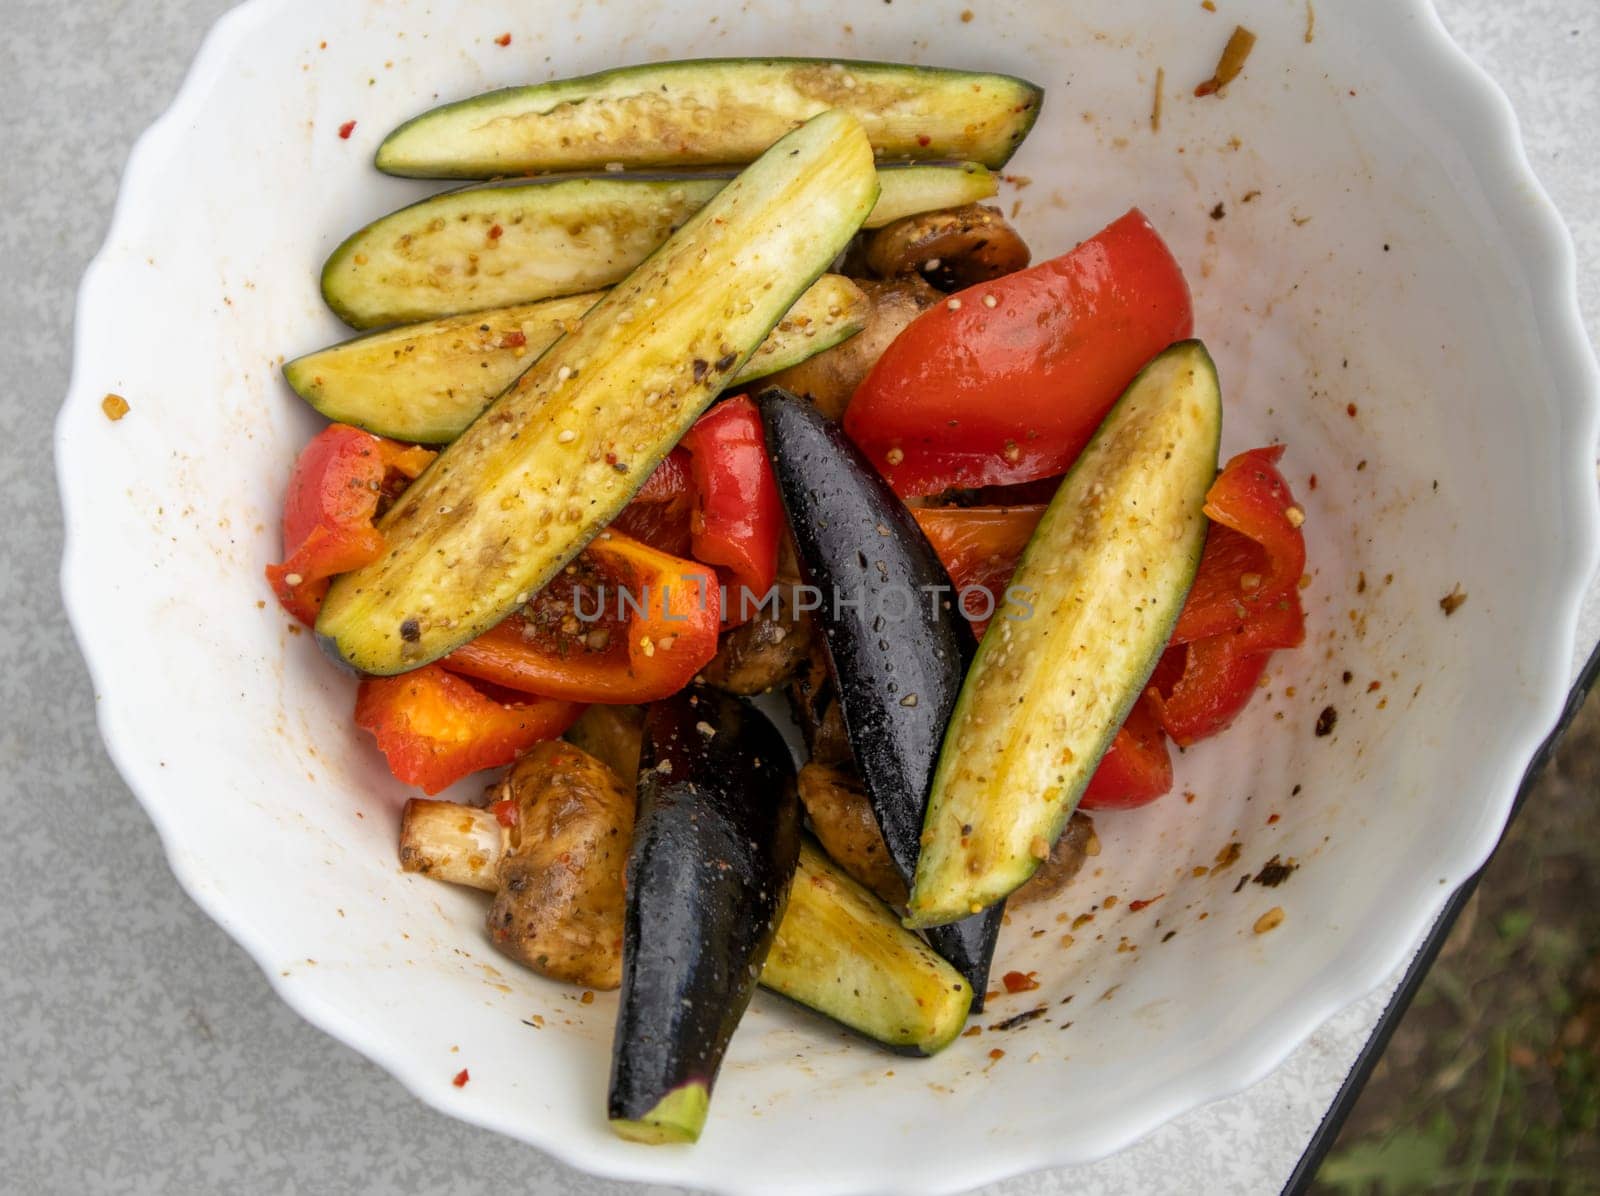 Grilled vegetables -bell peppers, zucchini, eggplant on a white plate, top view, close-up by claire_lucia